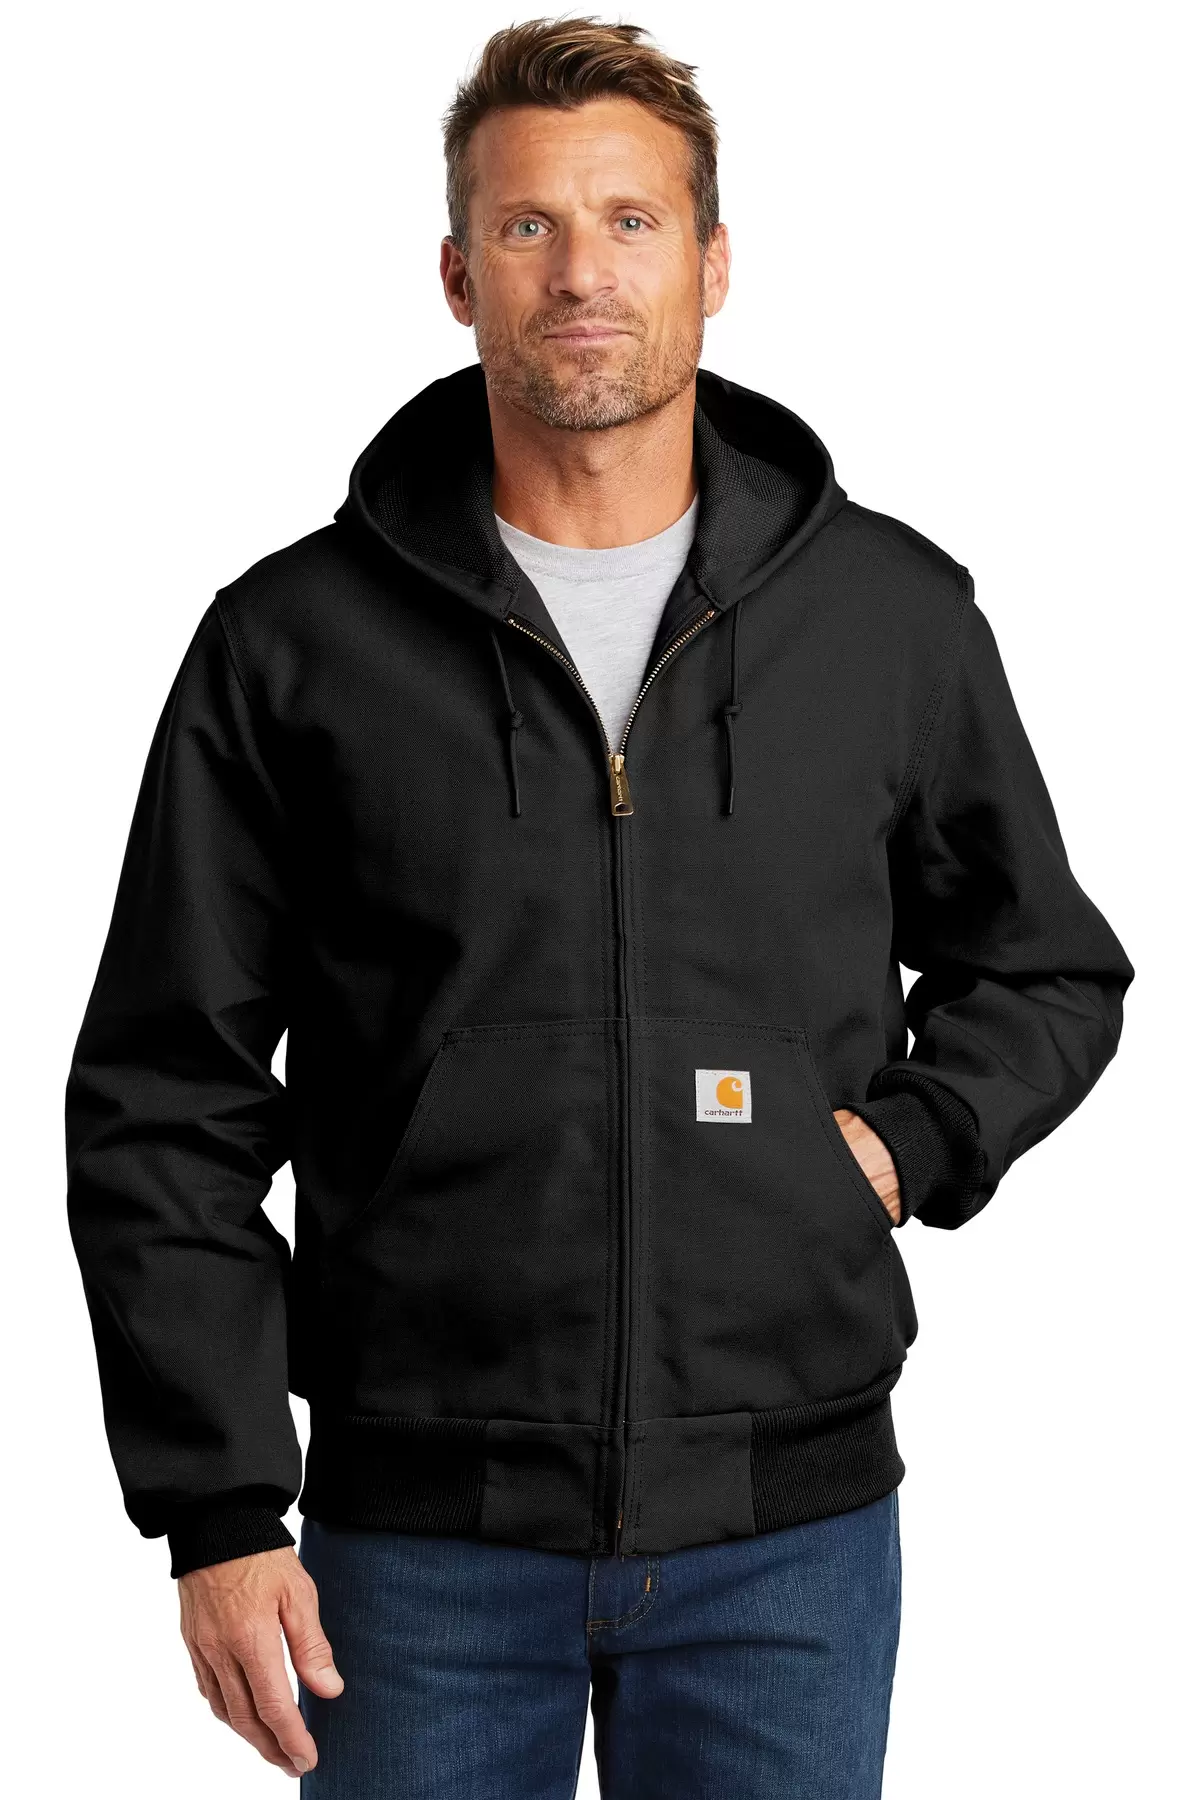 CARHARTT J131 Carhartt Thermal-Lined Duck Active Jac